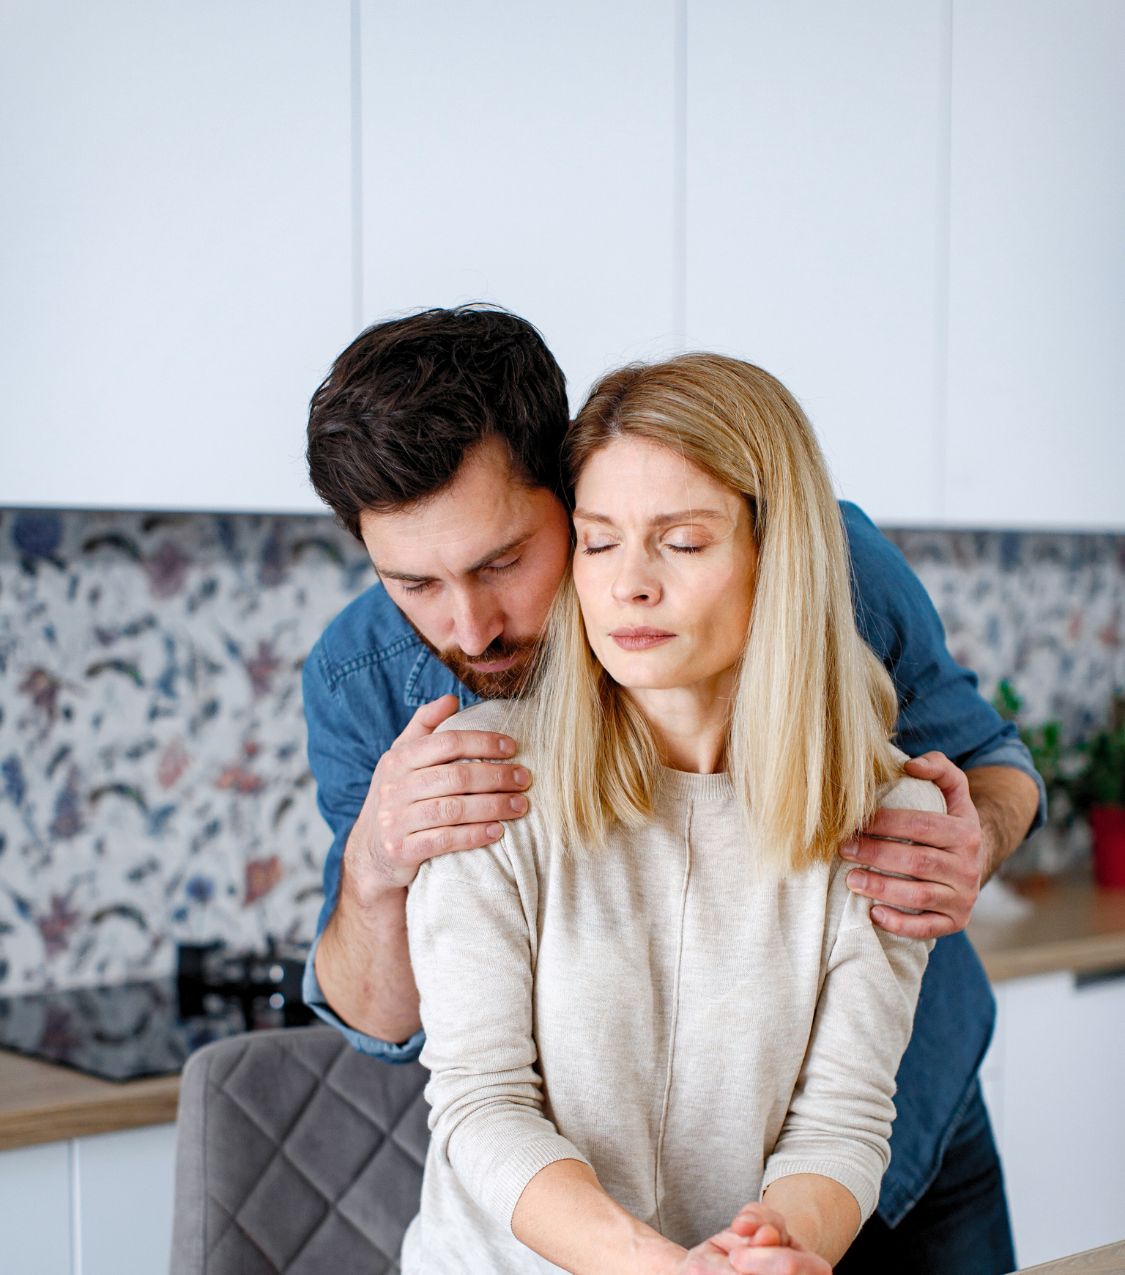 A man is hugging a woman, both looking hurt but trying to recover, as if recovering from an affair. If you are in the same situation and looking for help - we can help. Affair recovery program with Relationship Experts based in Florida, US